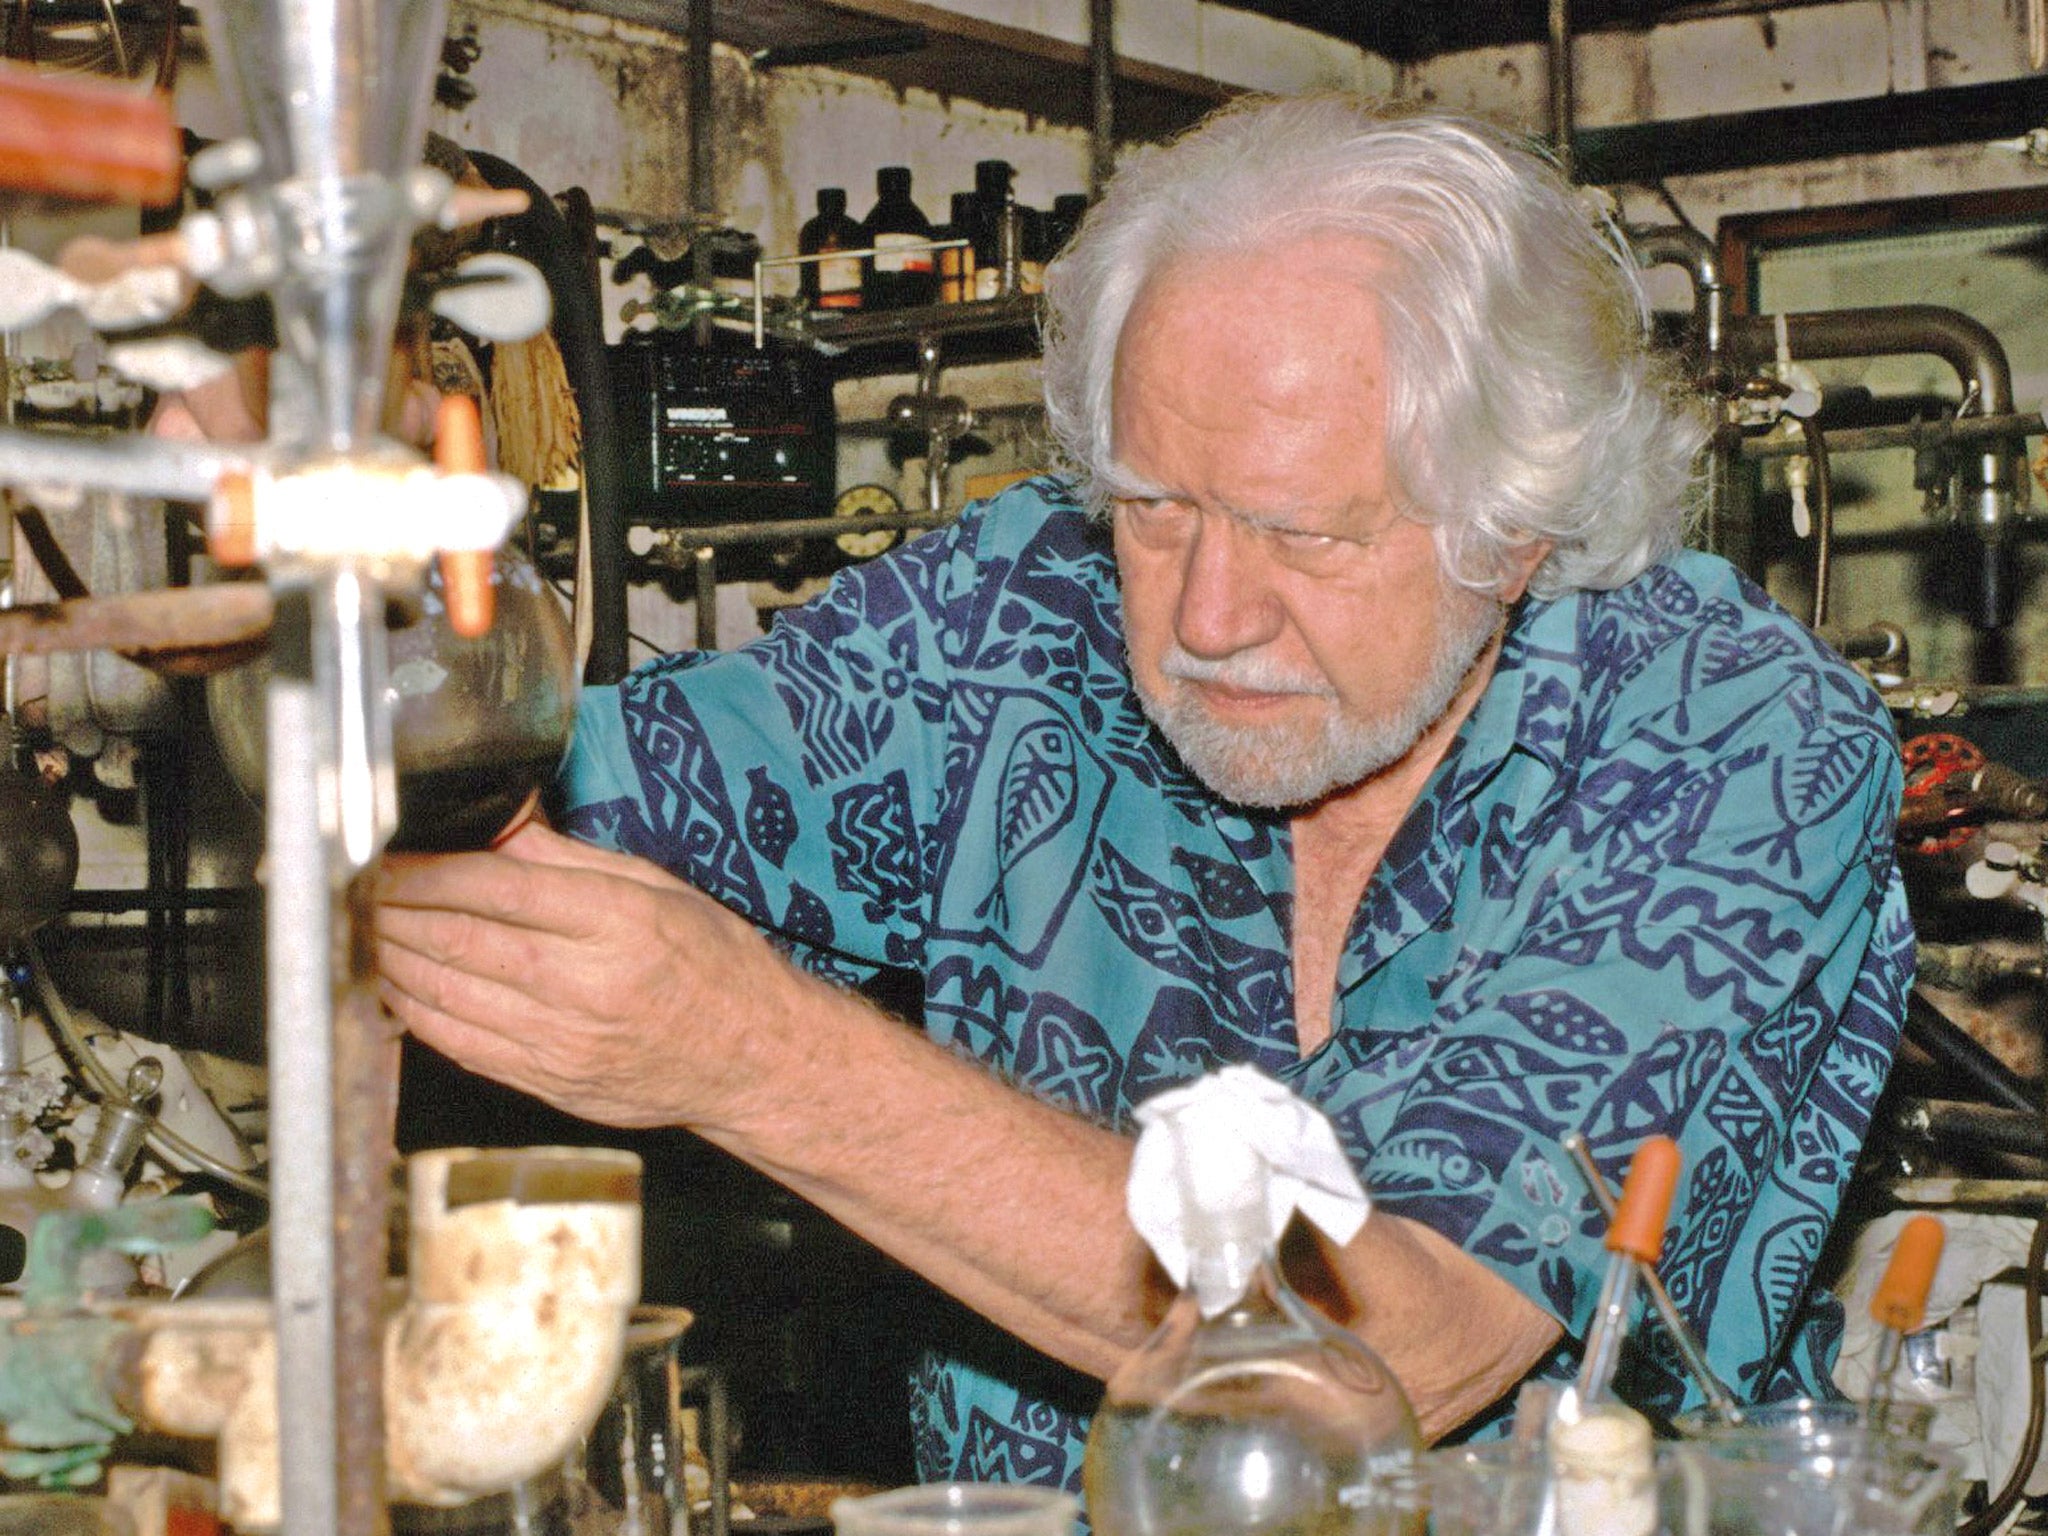 Shulgin in his home laboratory: he would pour his creations into hundreds of glass bottles, each labelled with its unique chemical formula